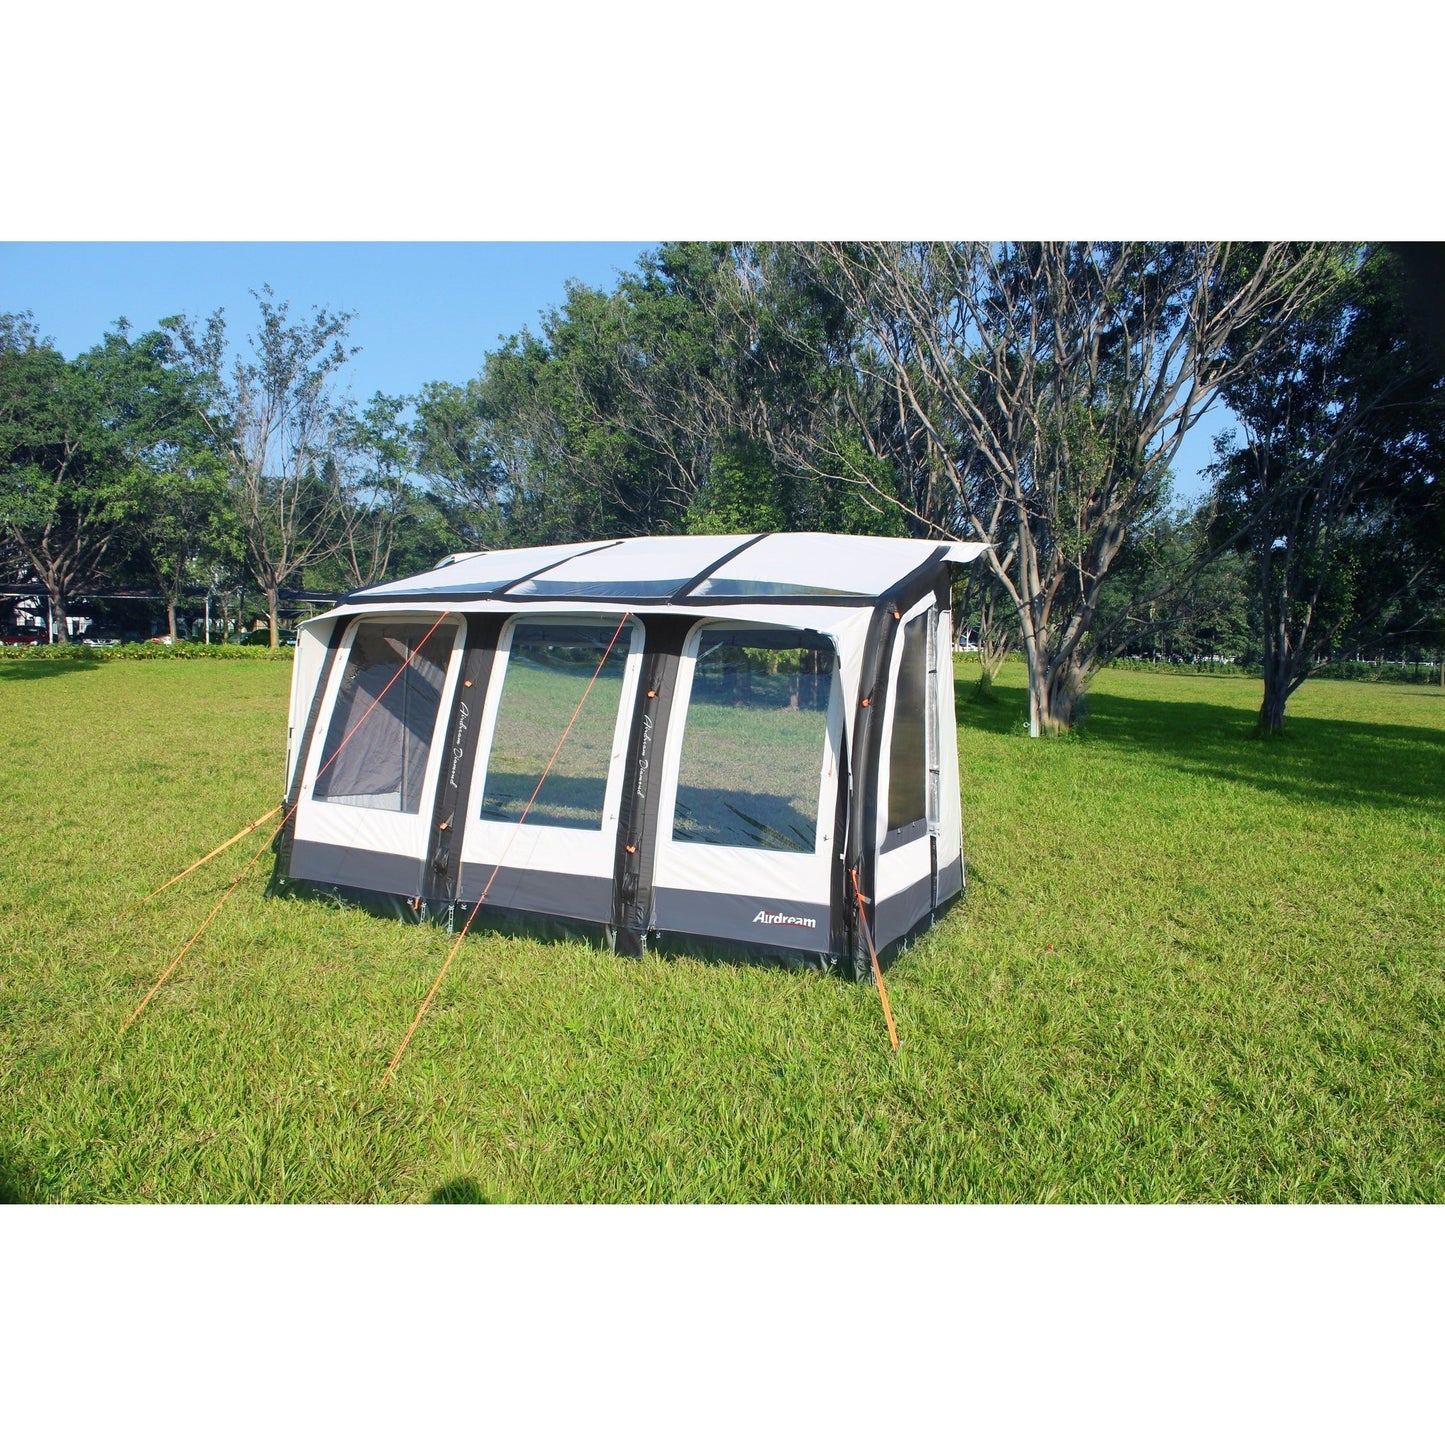 CampTech AirDream Diamond Inflatable Porch Awning + Free Storm Straps made by CampTech. A Air Awning sold by Quality Caravan Awnings